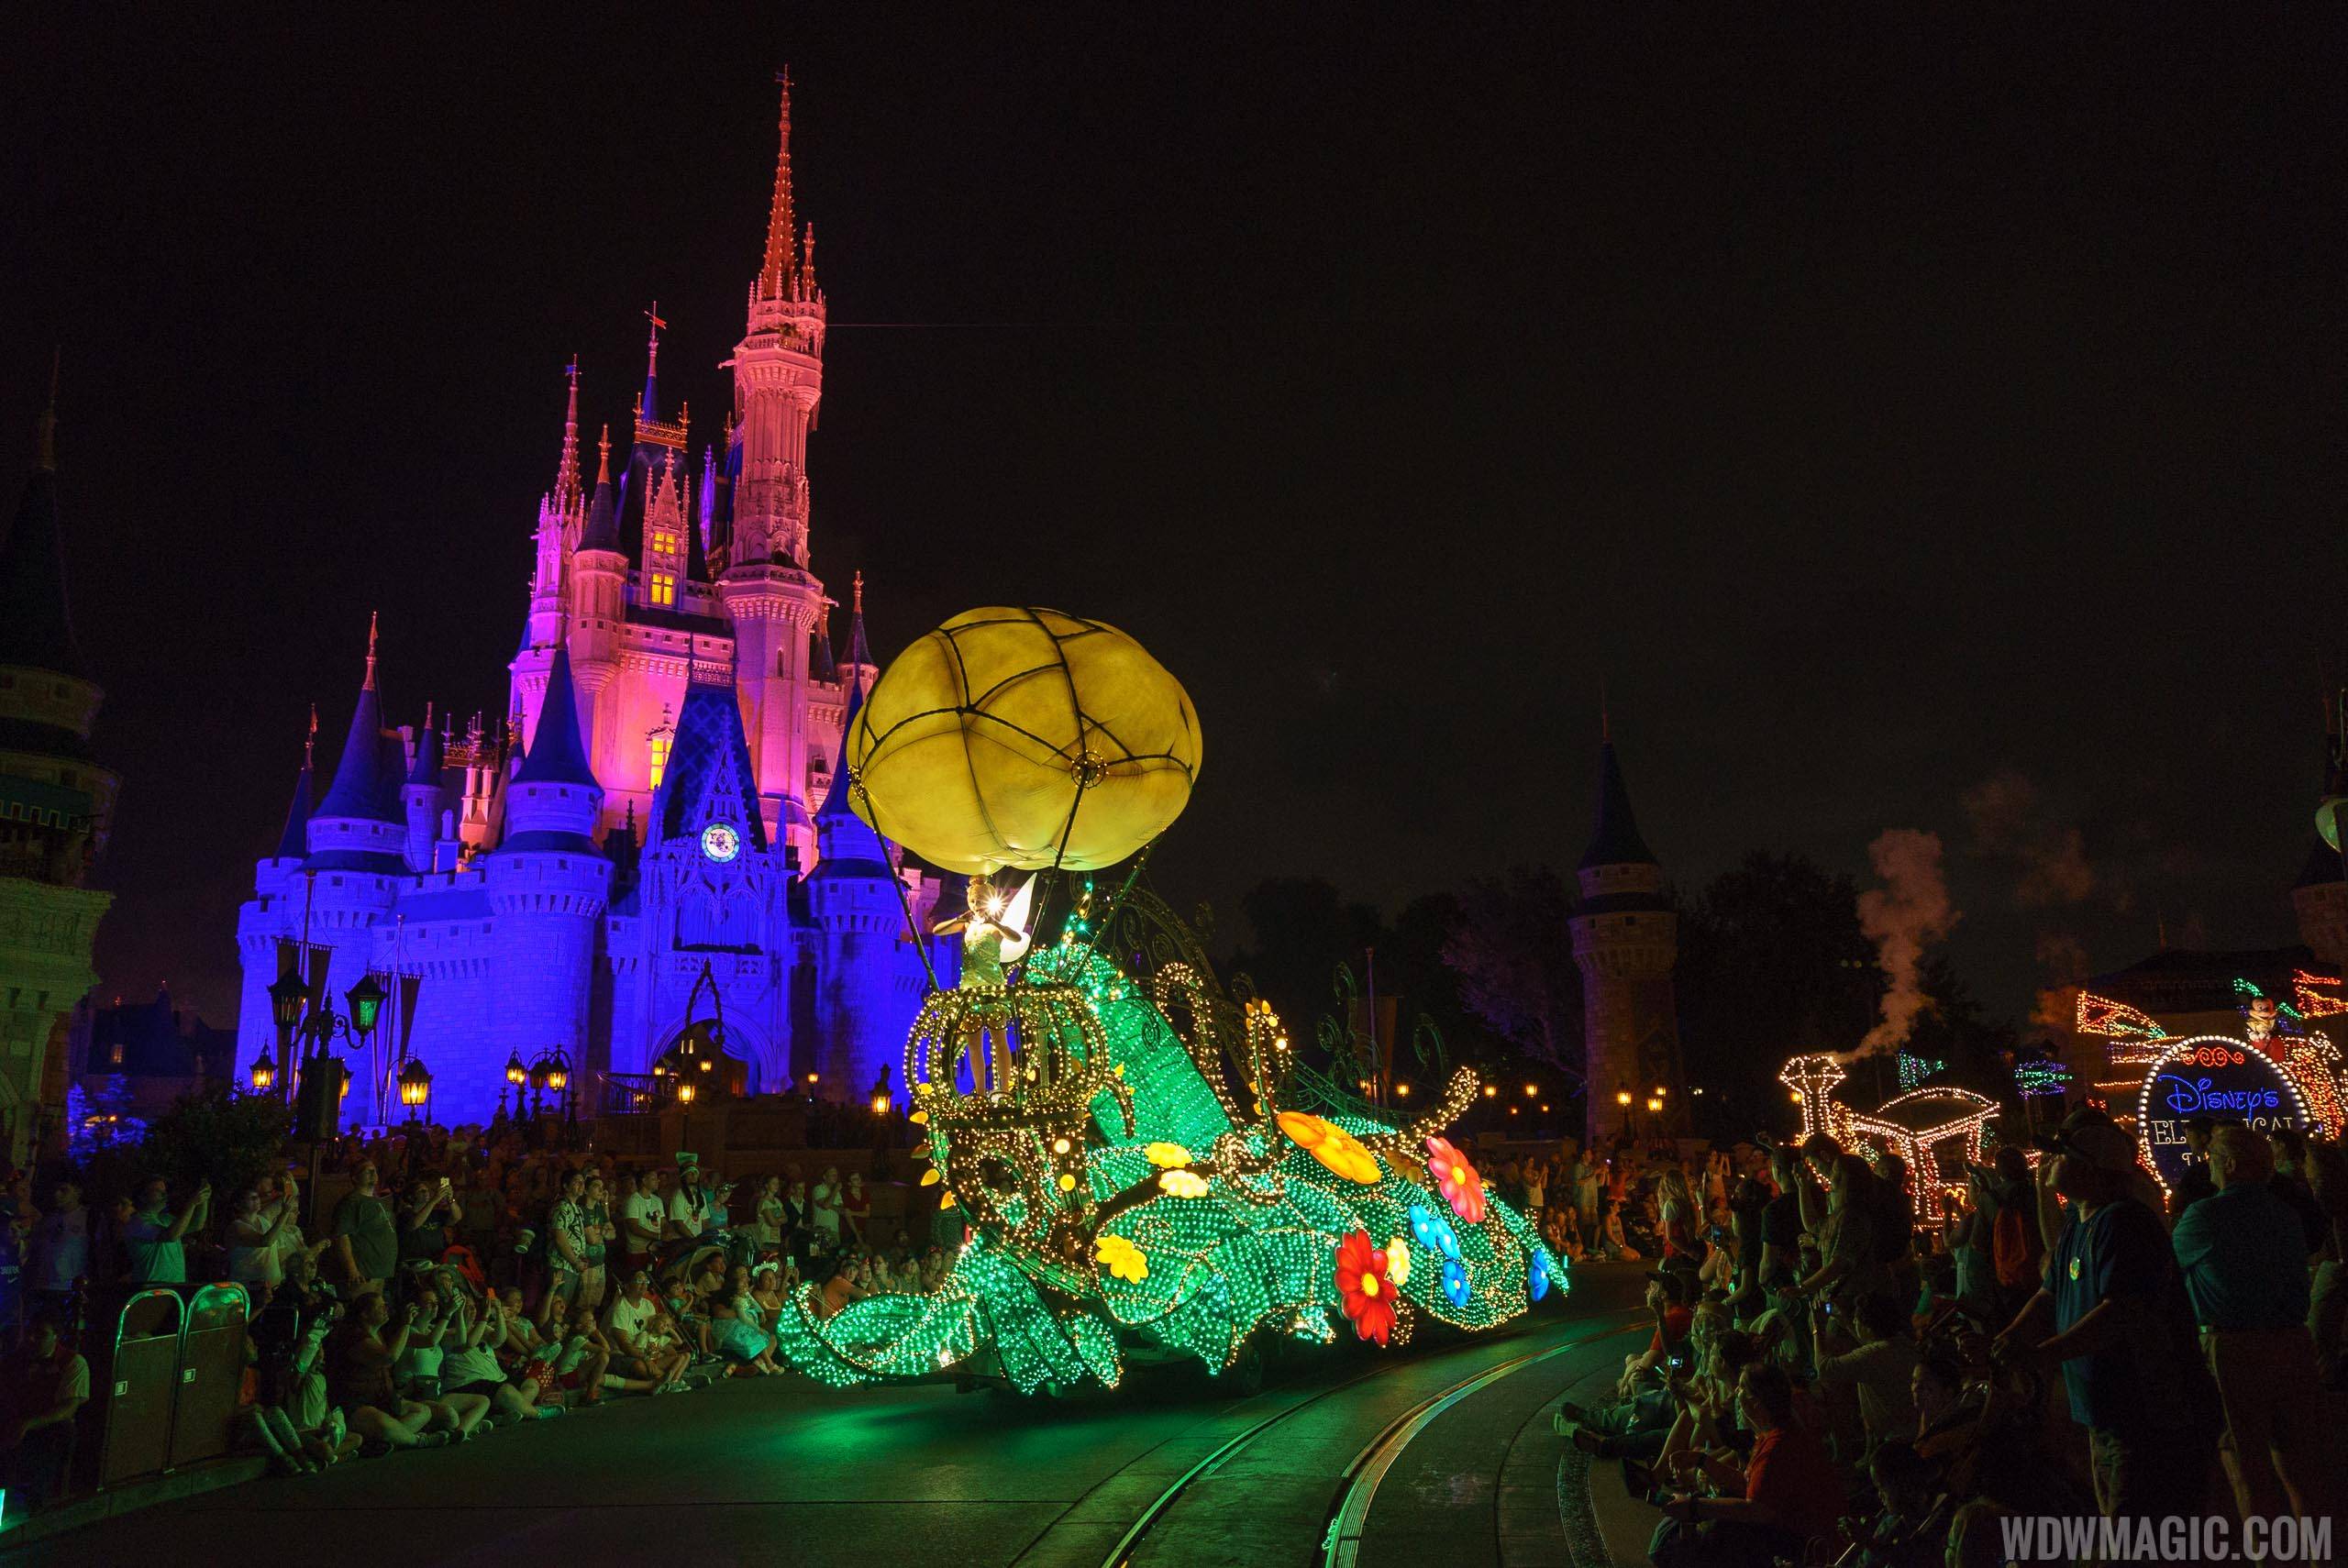 Main Street Electrical Parade confirmed to be remaining at the Magic Kingdom beyond Summer Nightastic